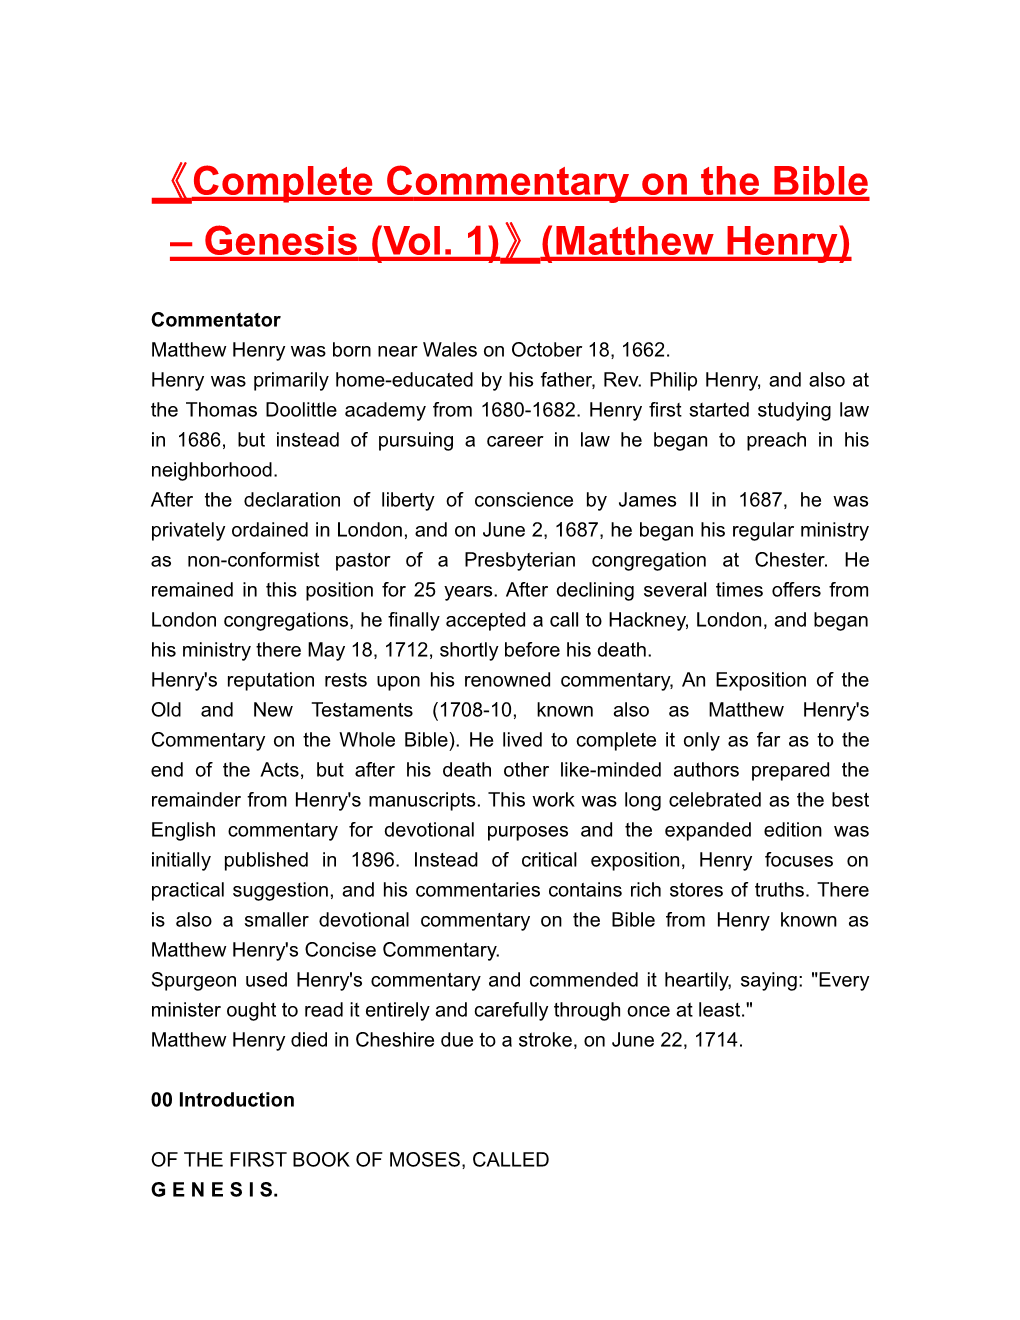 Completecommentary on the Bible Genesis(Vol. 1) (Matthew Henry)